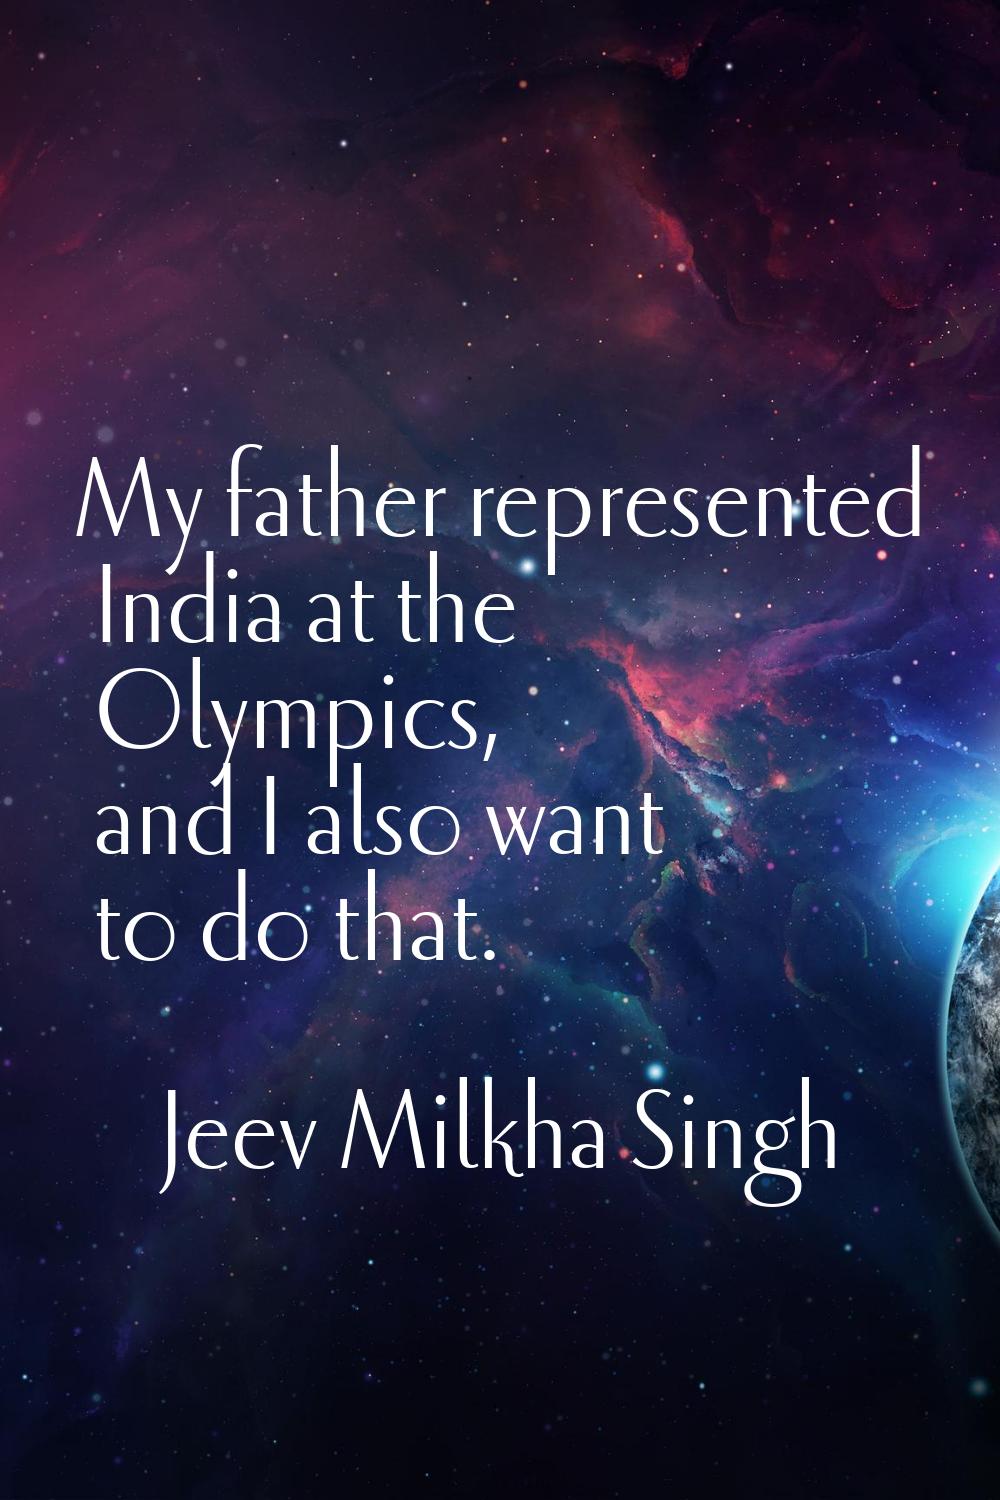 My father represented India at the Olympics, and I also want to do that.